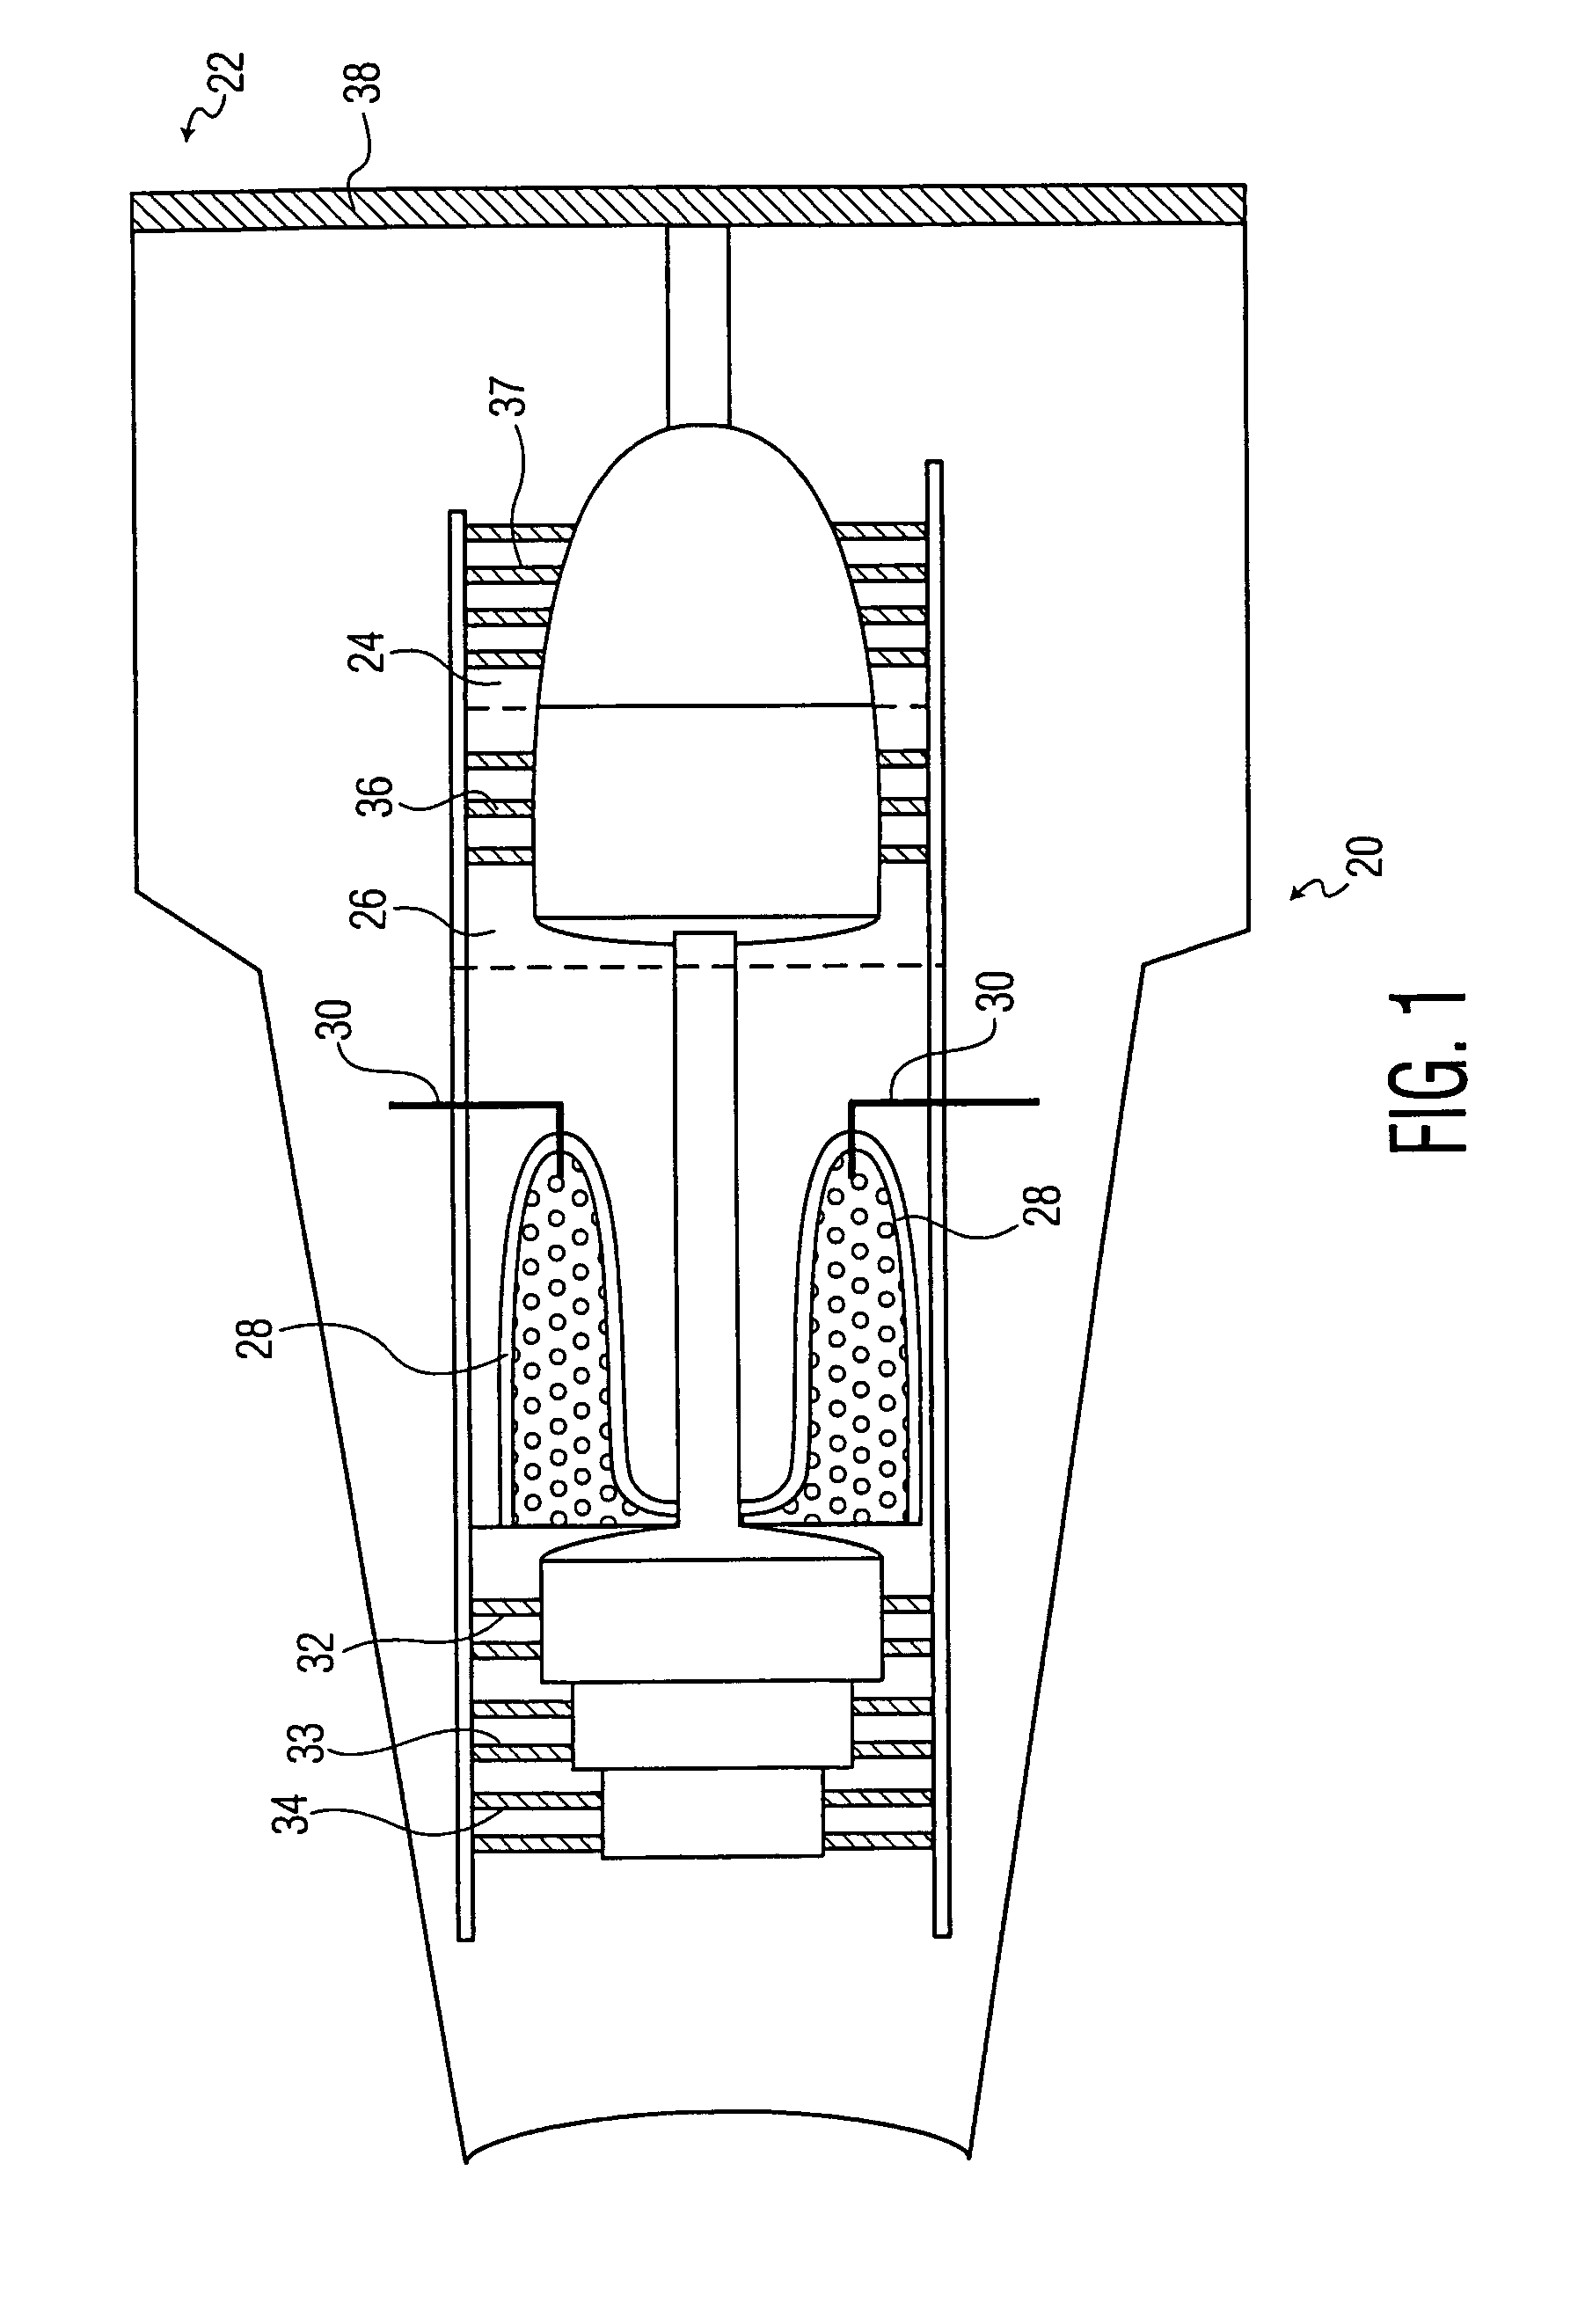 System for detecting and compensating for aerodynamic instabilities in turbo-jet engines